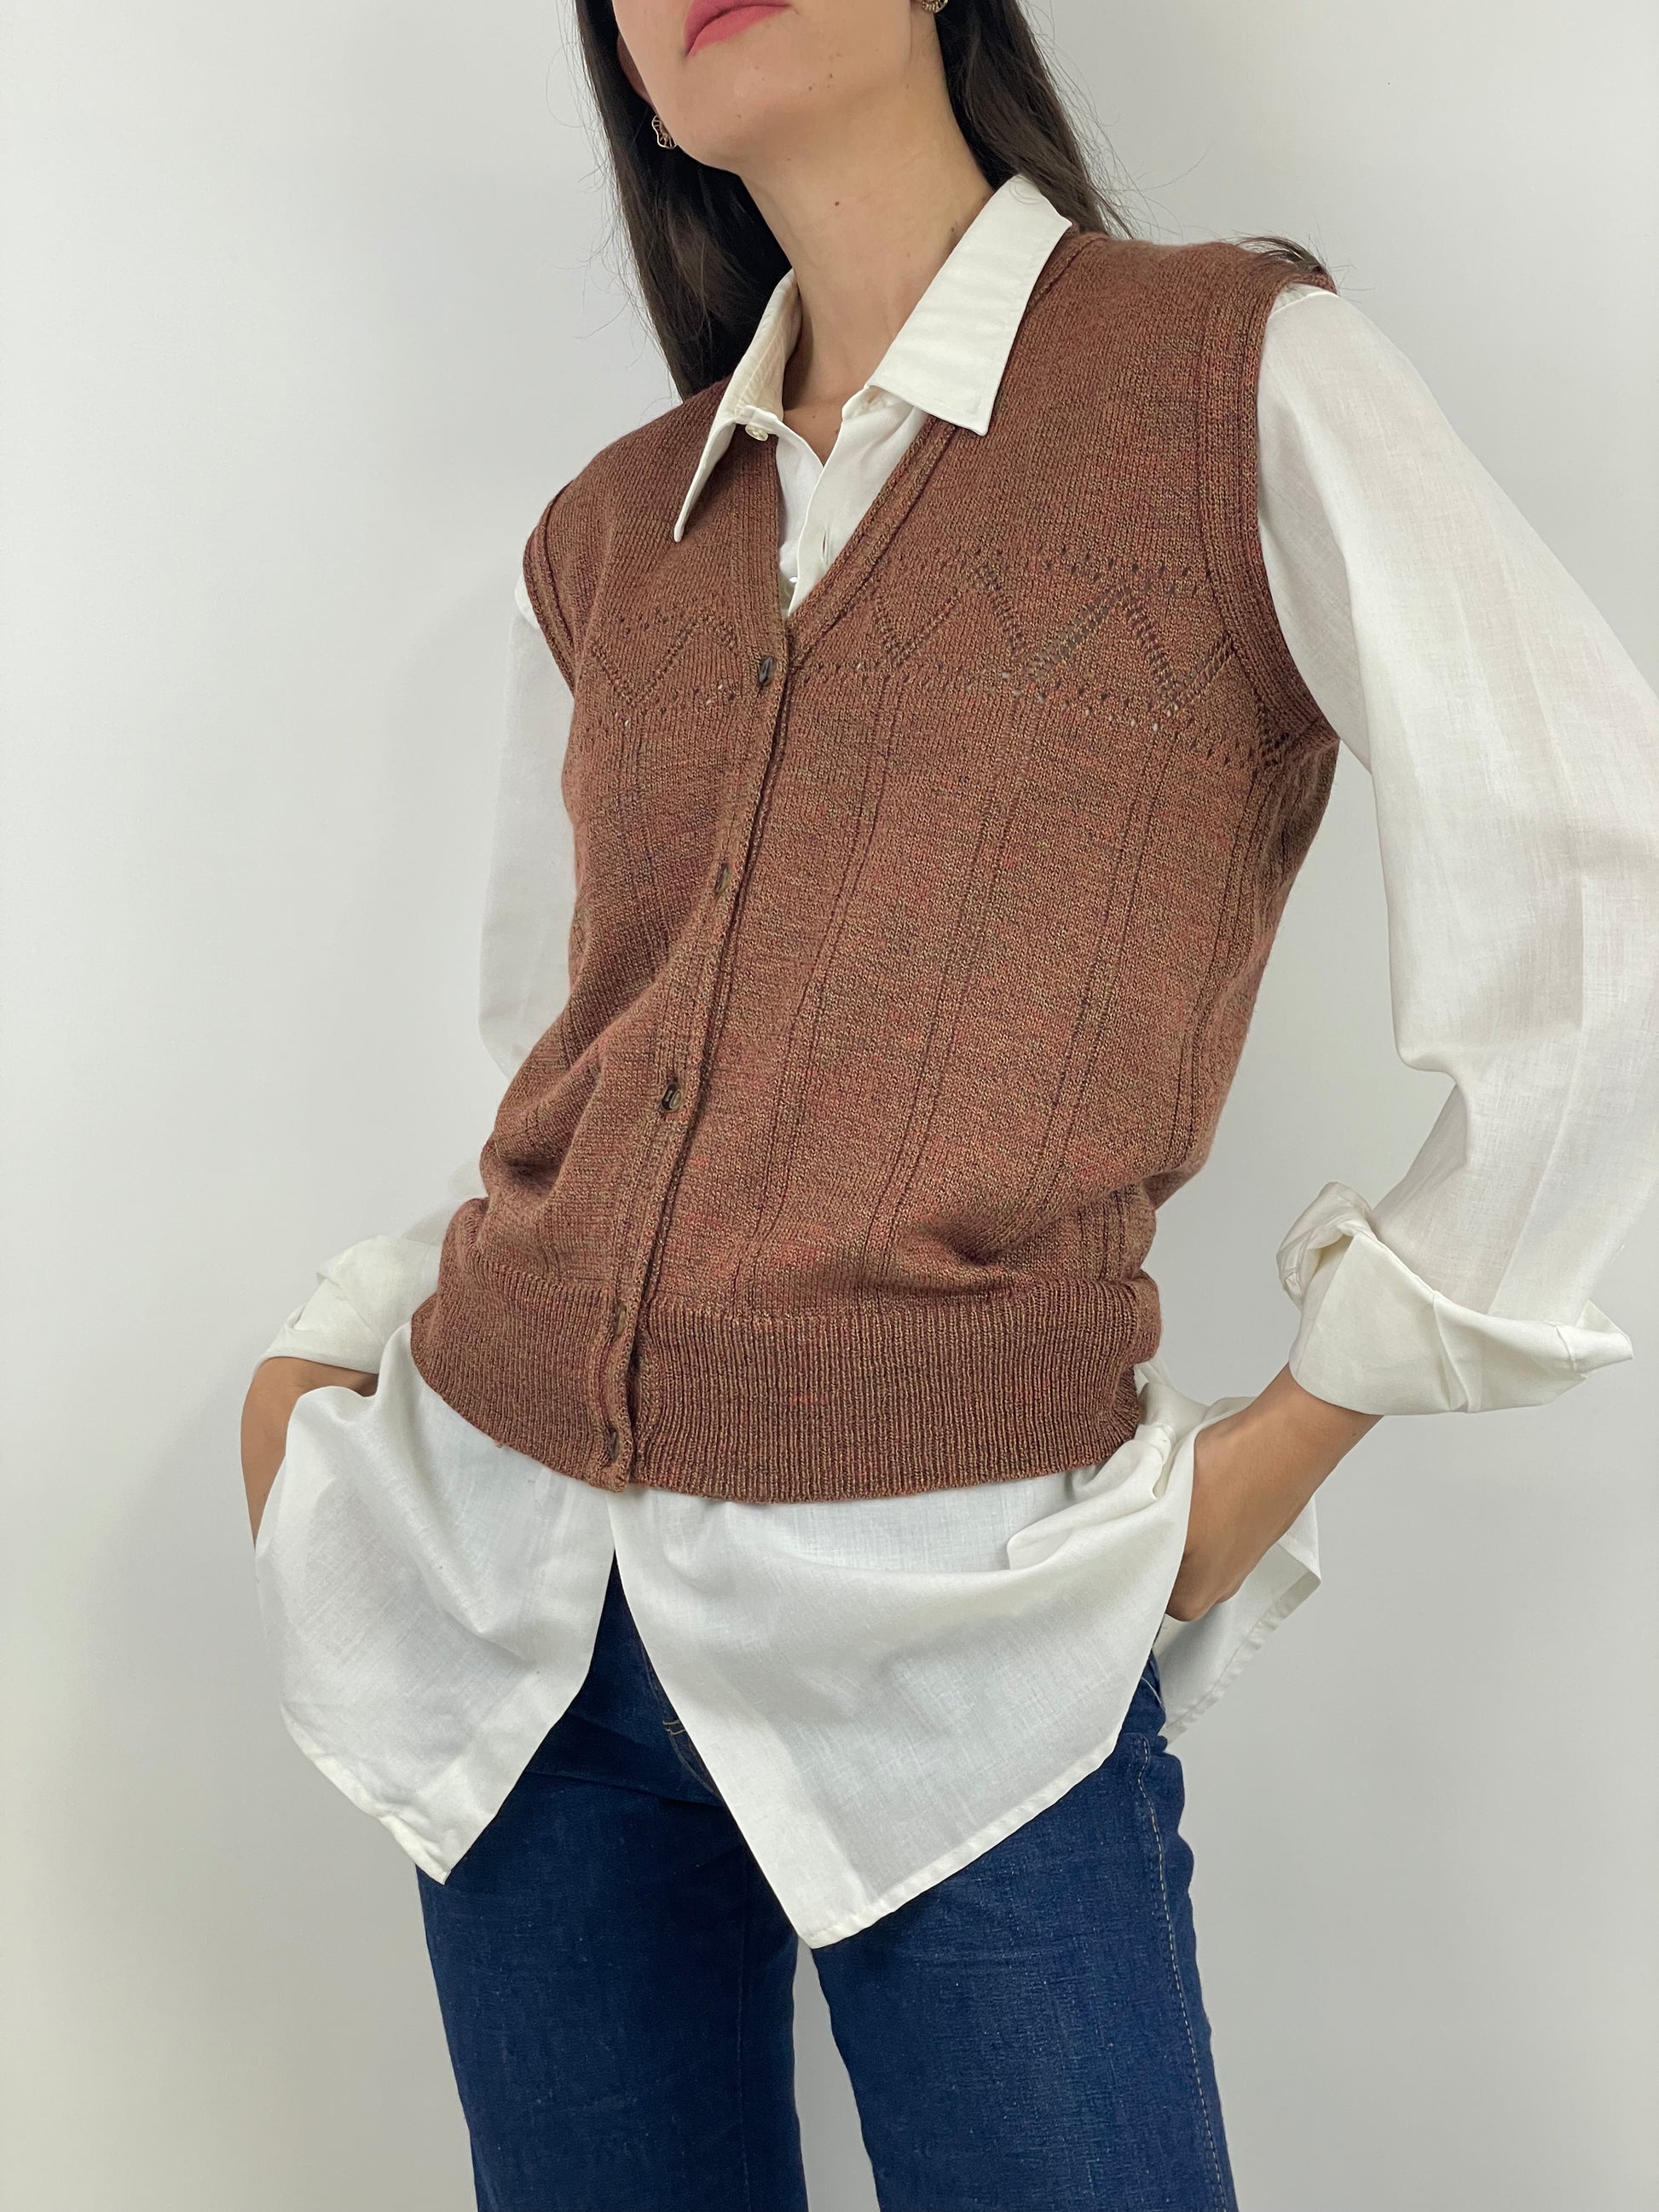 Made in Italy gilet for women-Discover the whole selection - Fangovintage